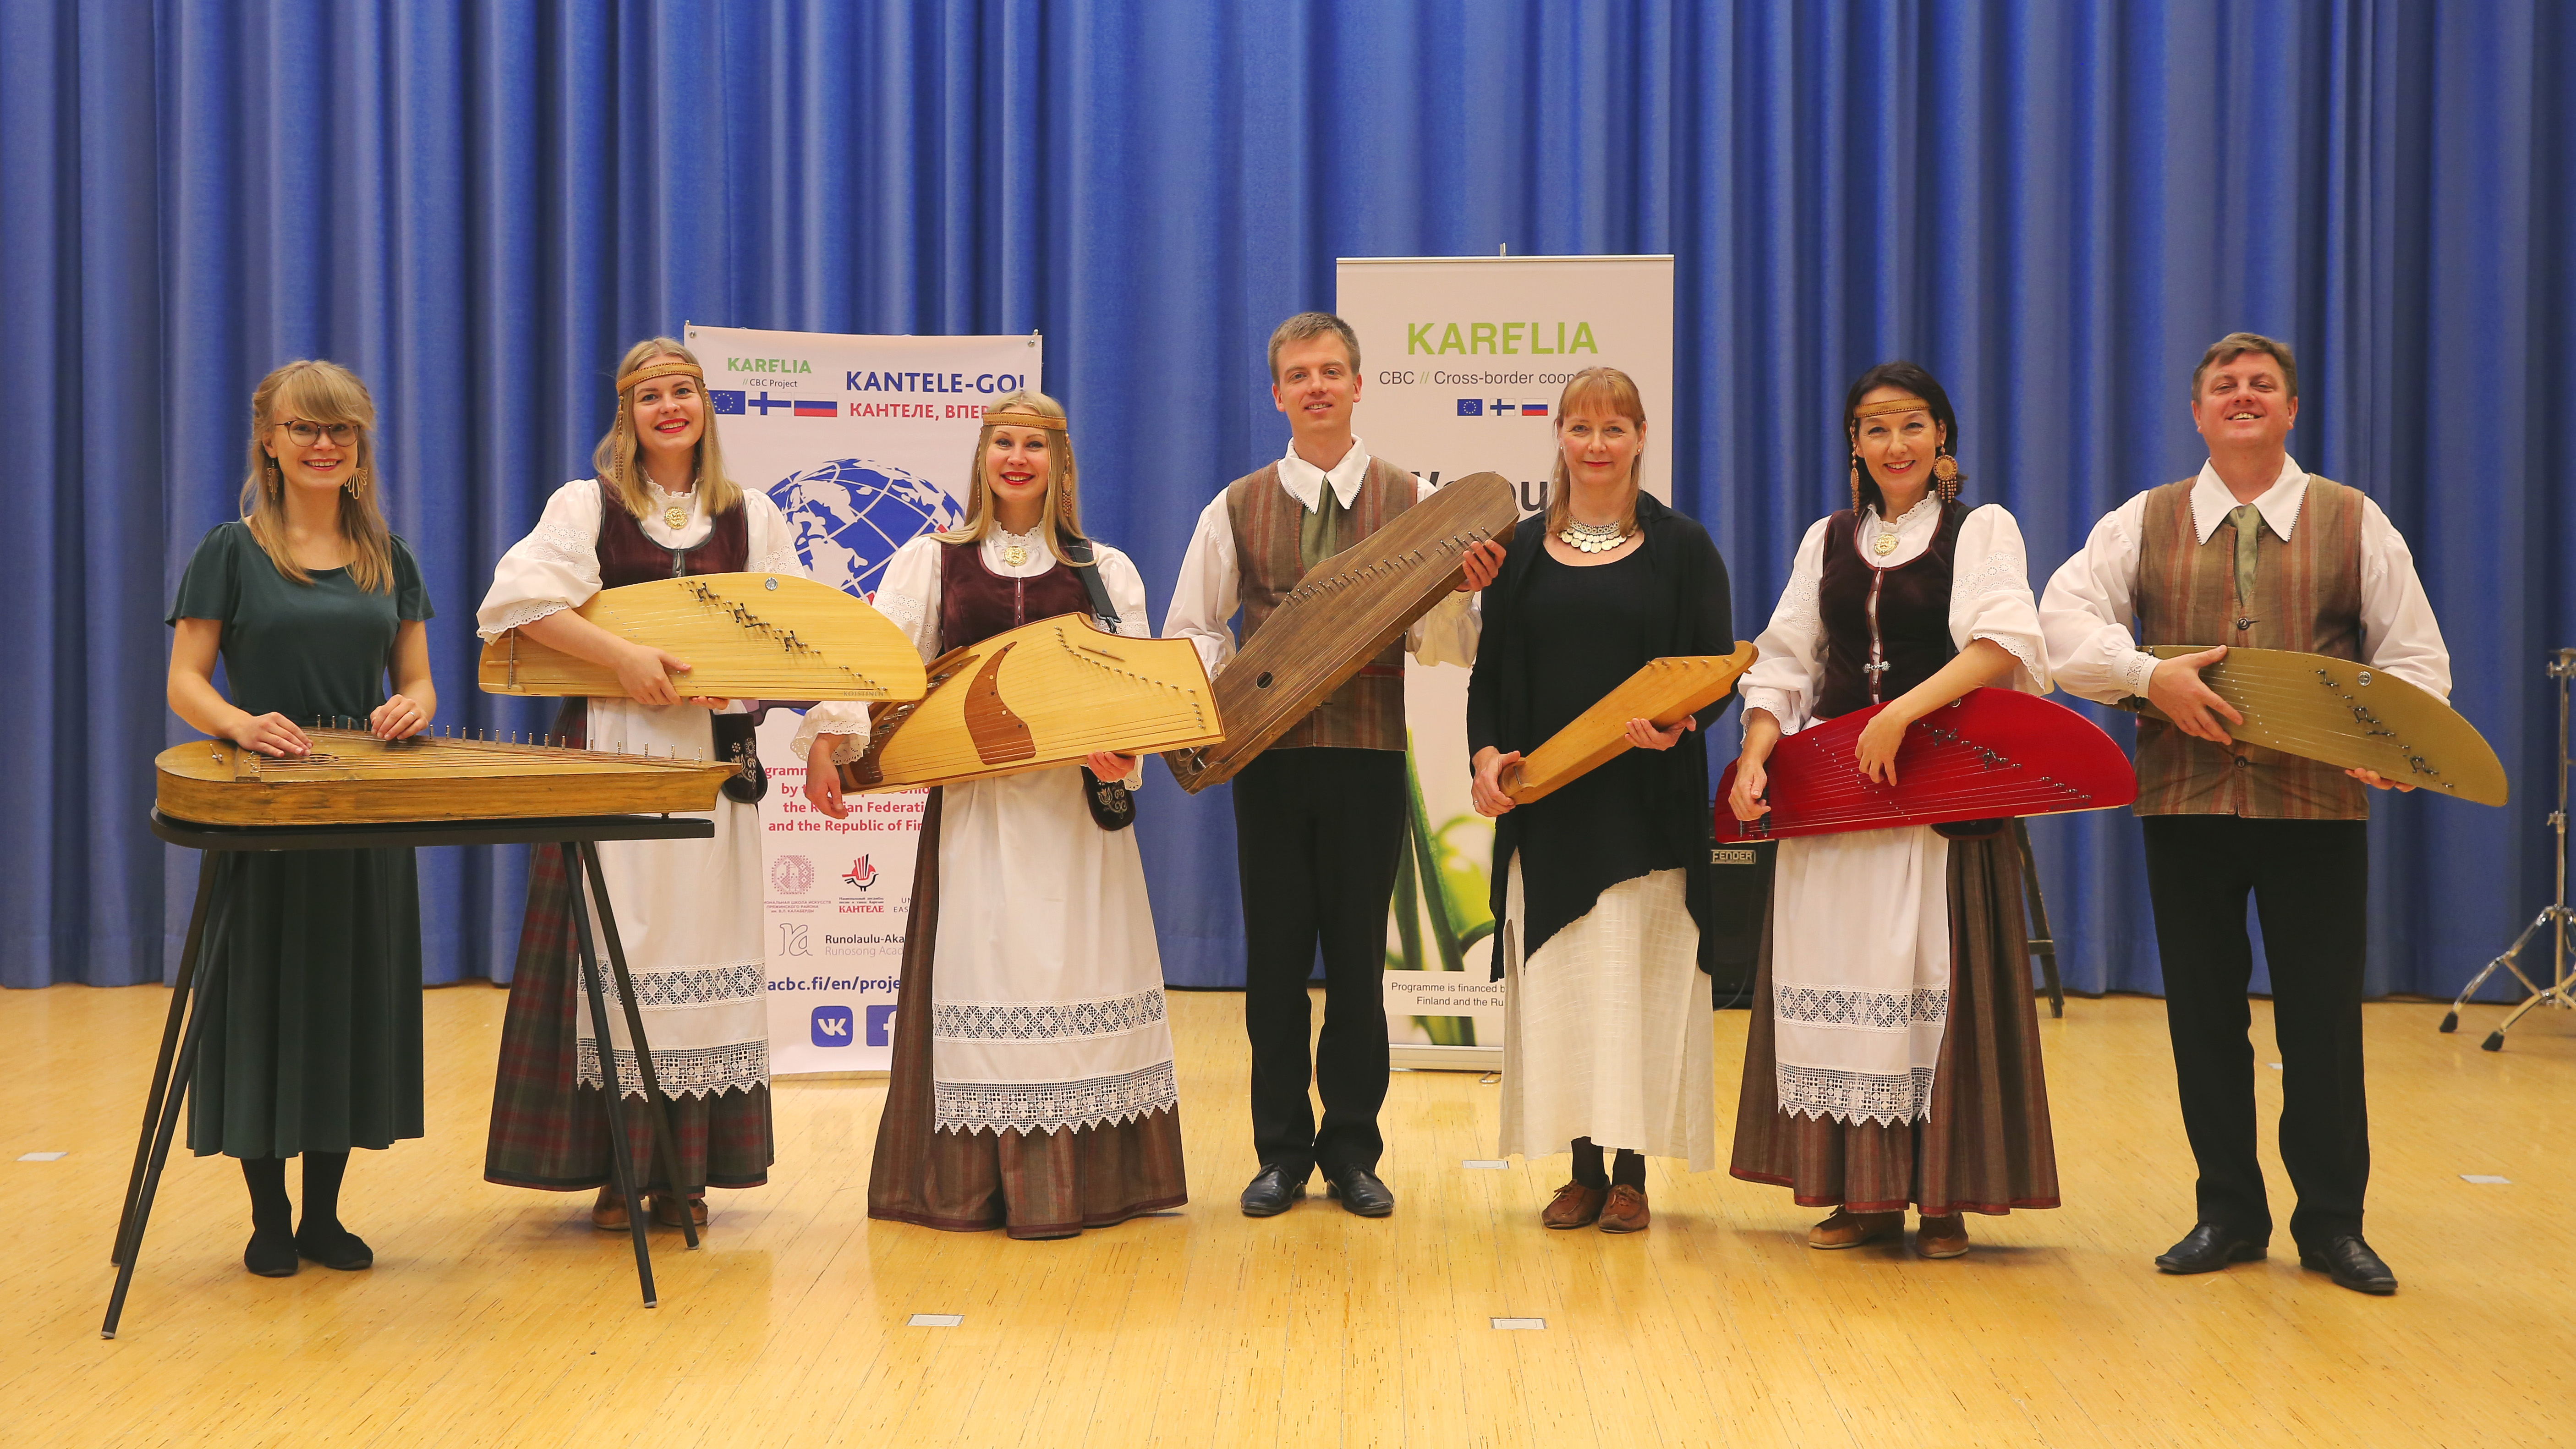 Kantele musicians in traditional folk costumes